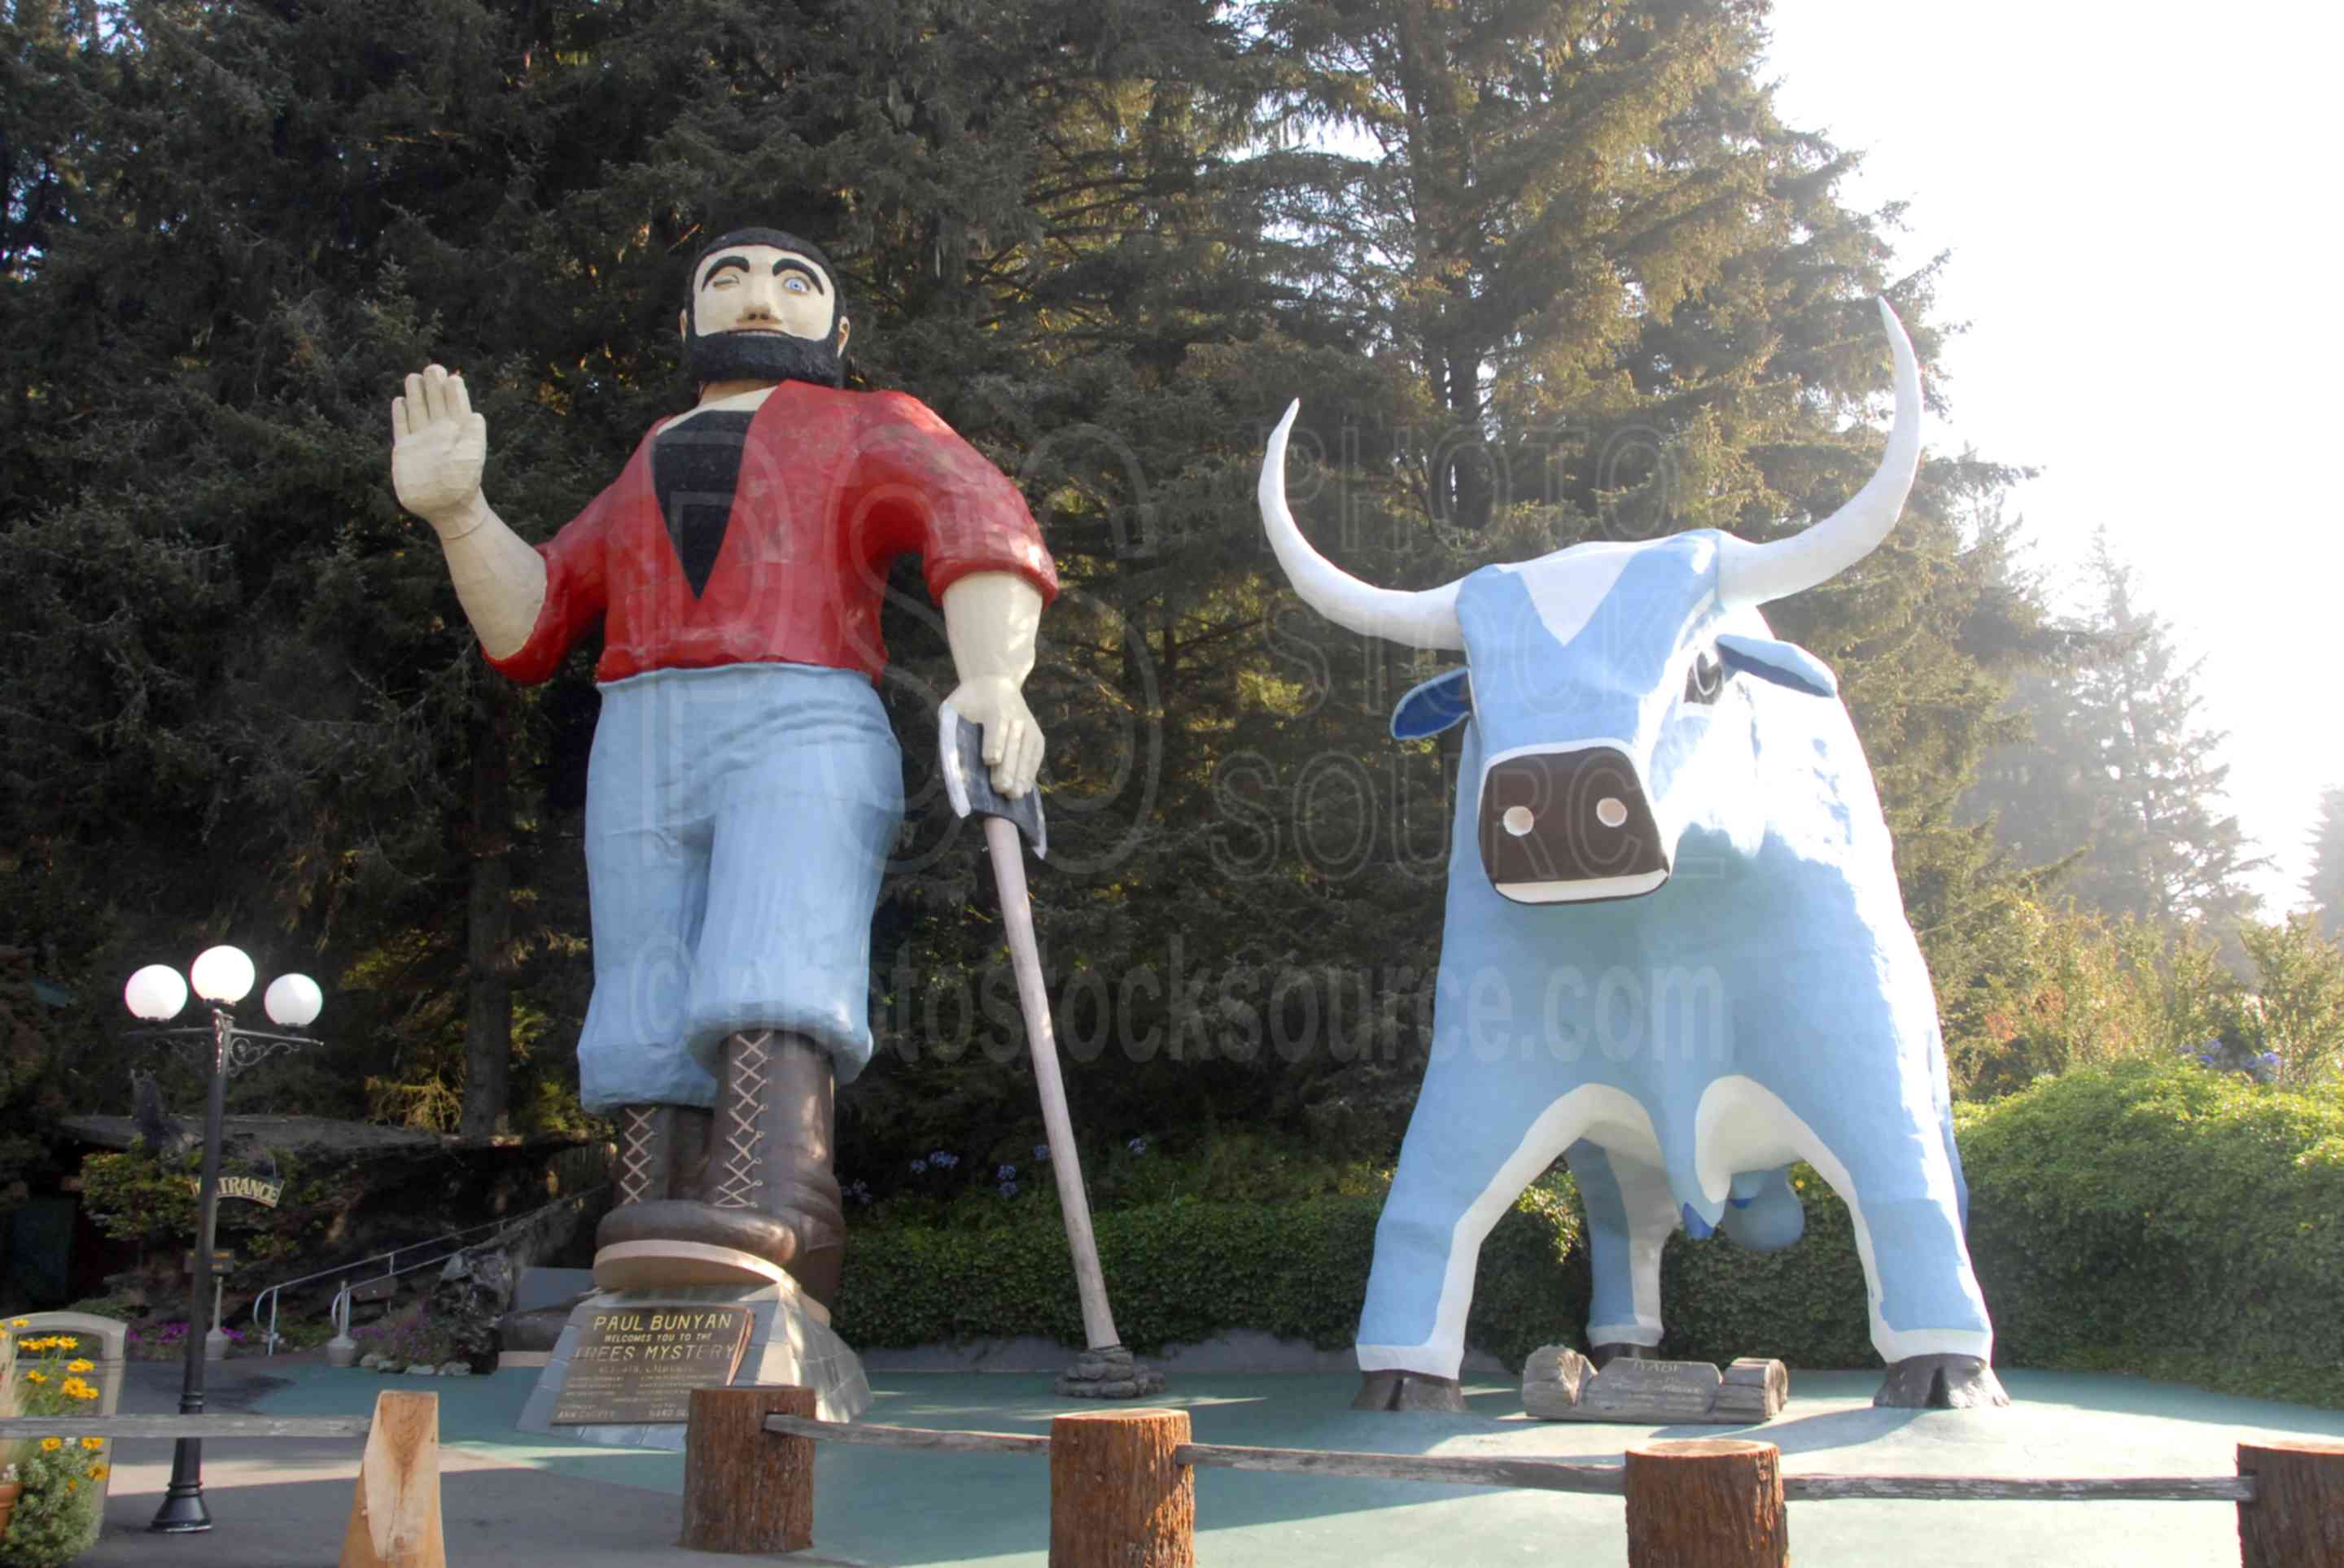 Paul Bunyan and Babe,roadside attraction,attraction,paul bunyan,babe,blue ox,sculpture,giant